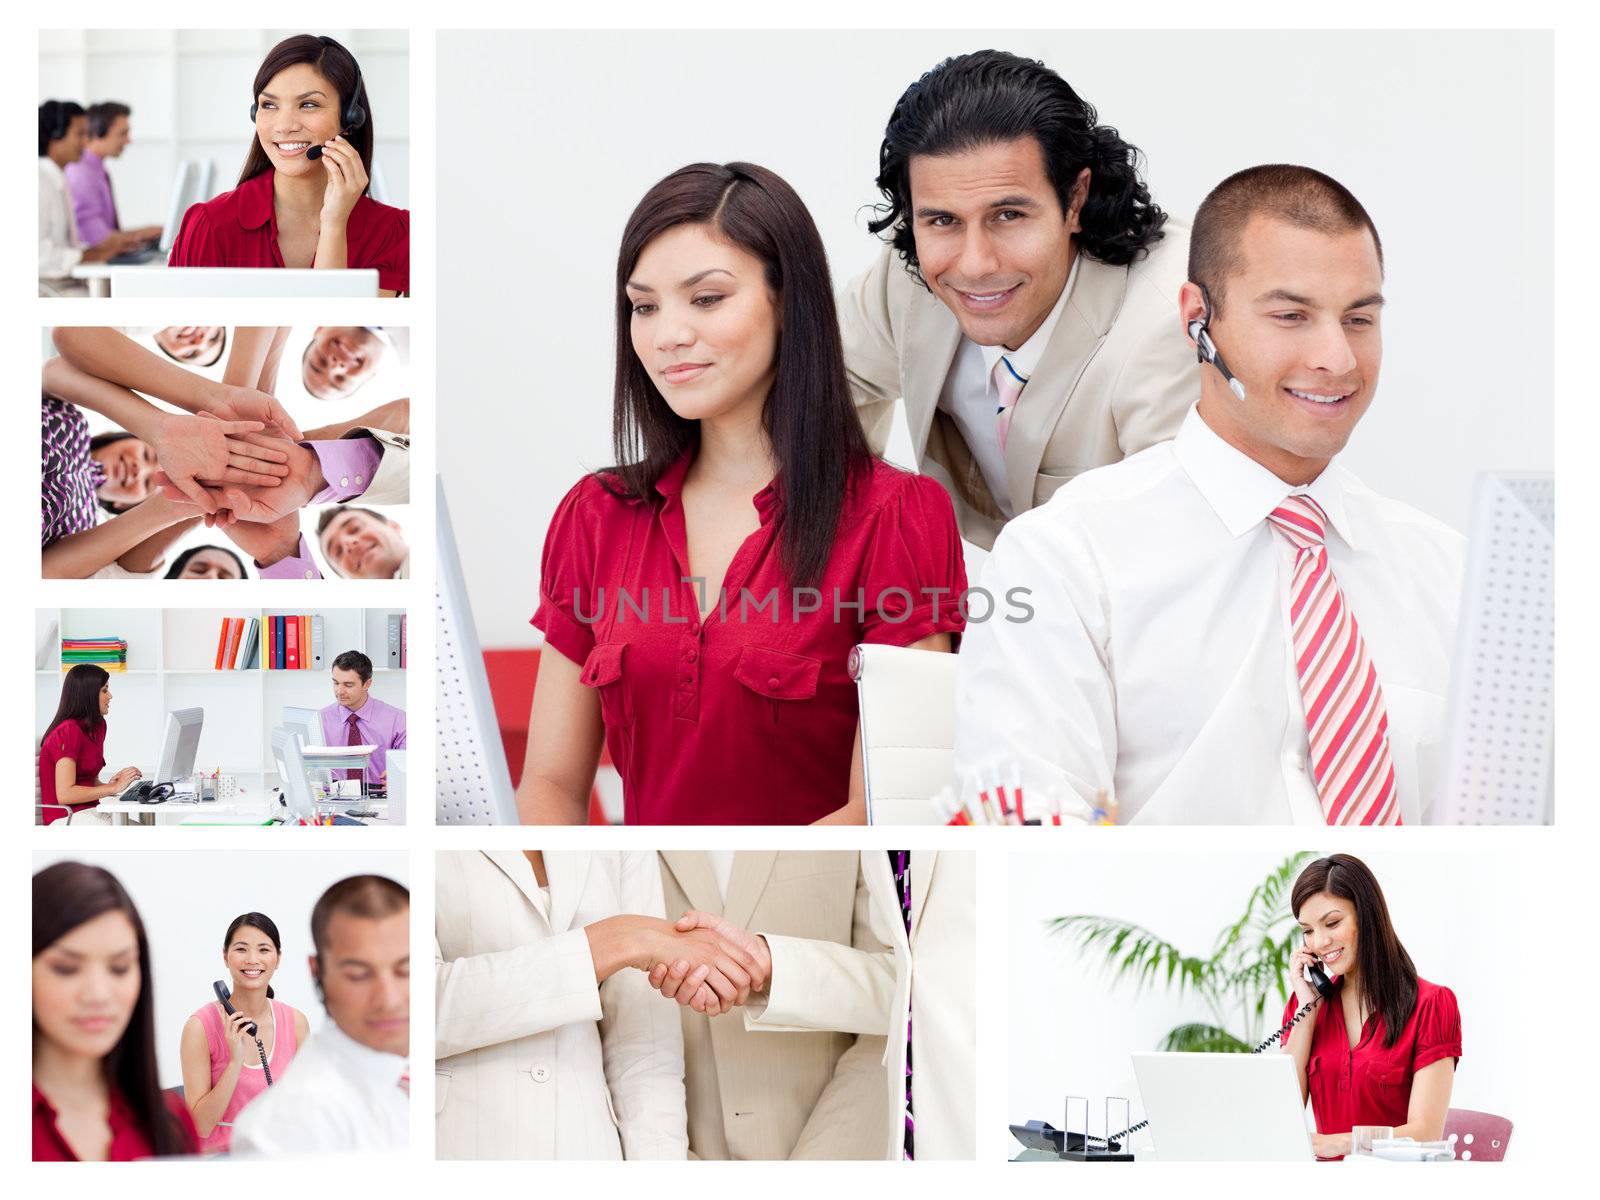 Collage of working business people by Wavebreakmedia